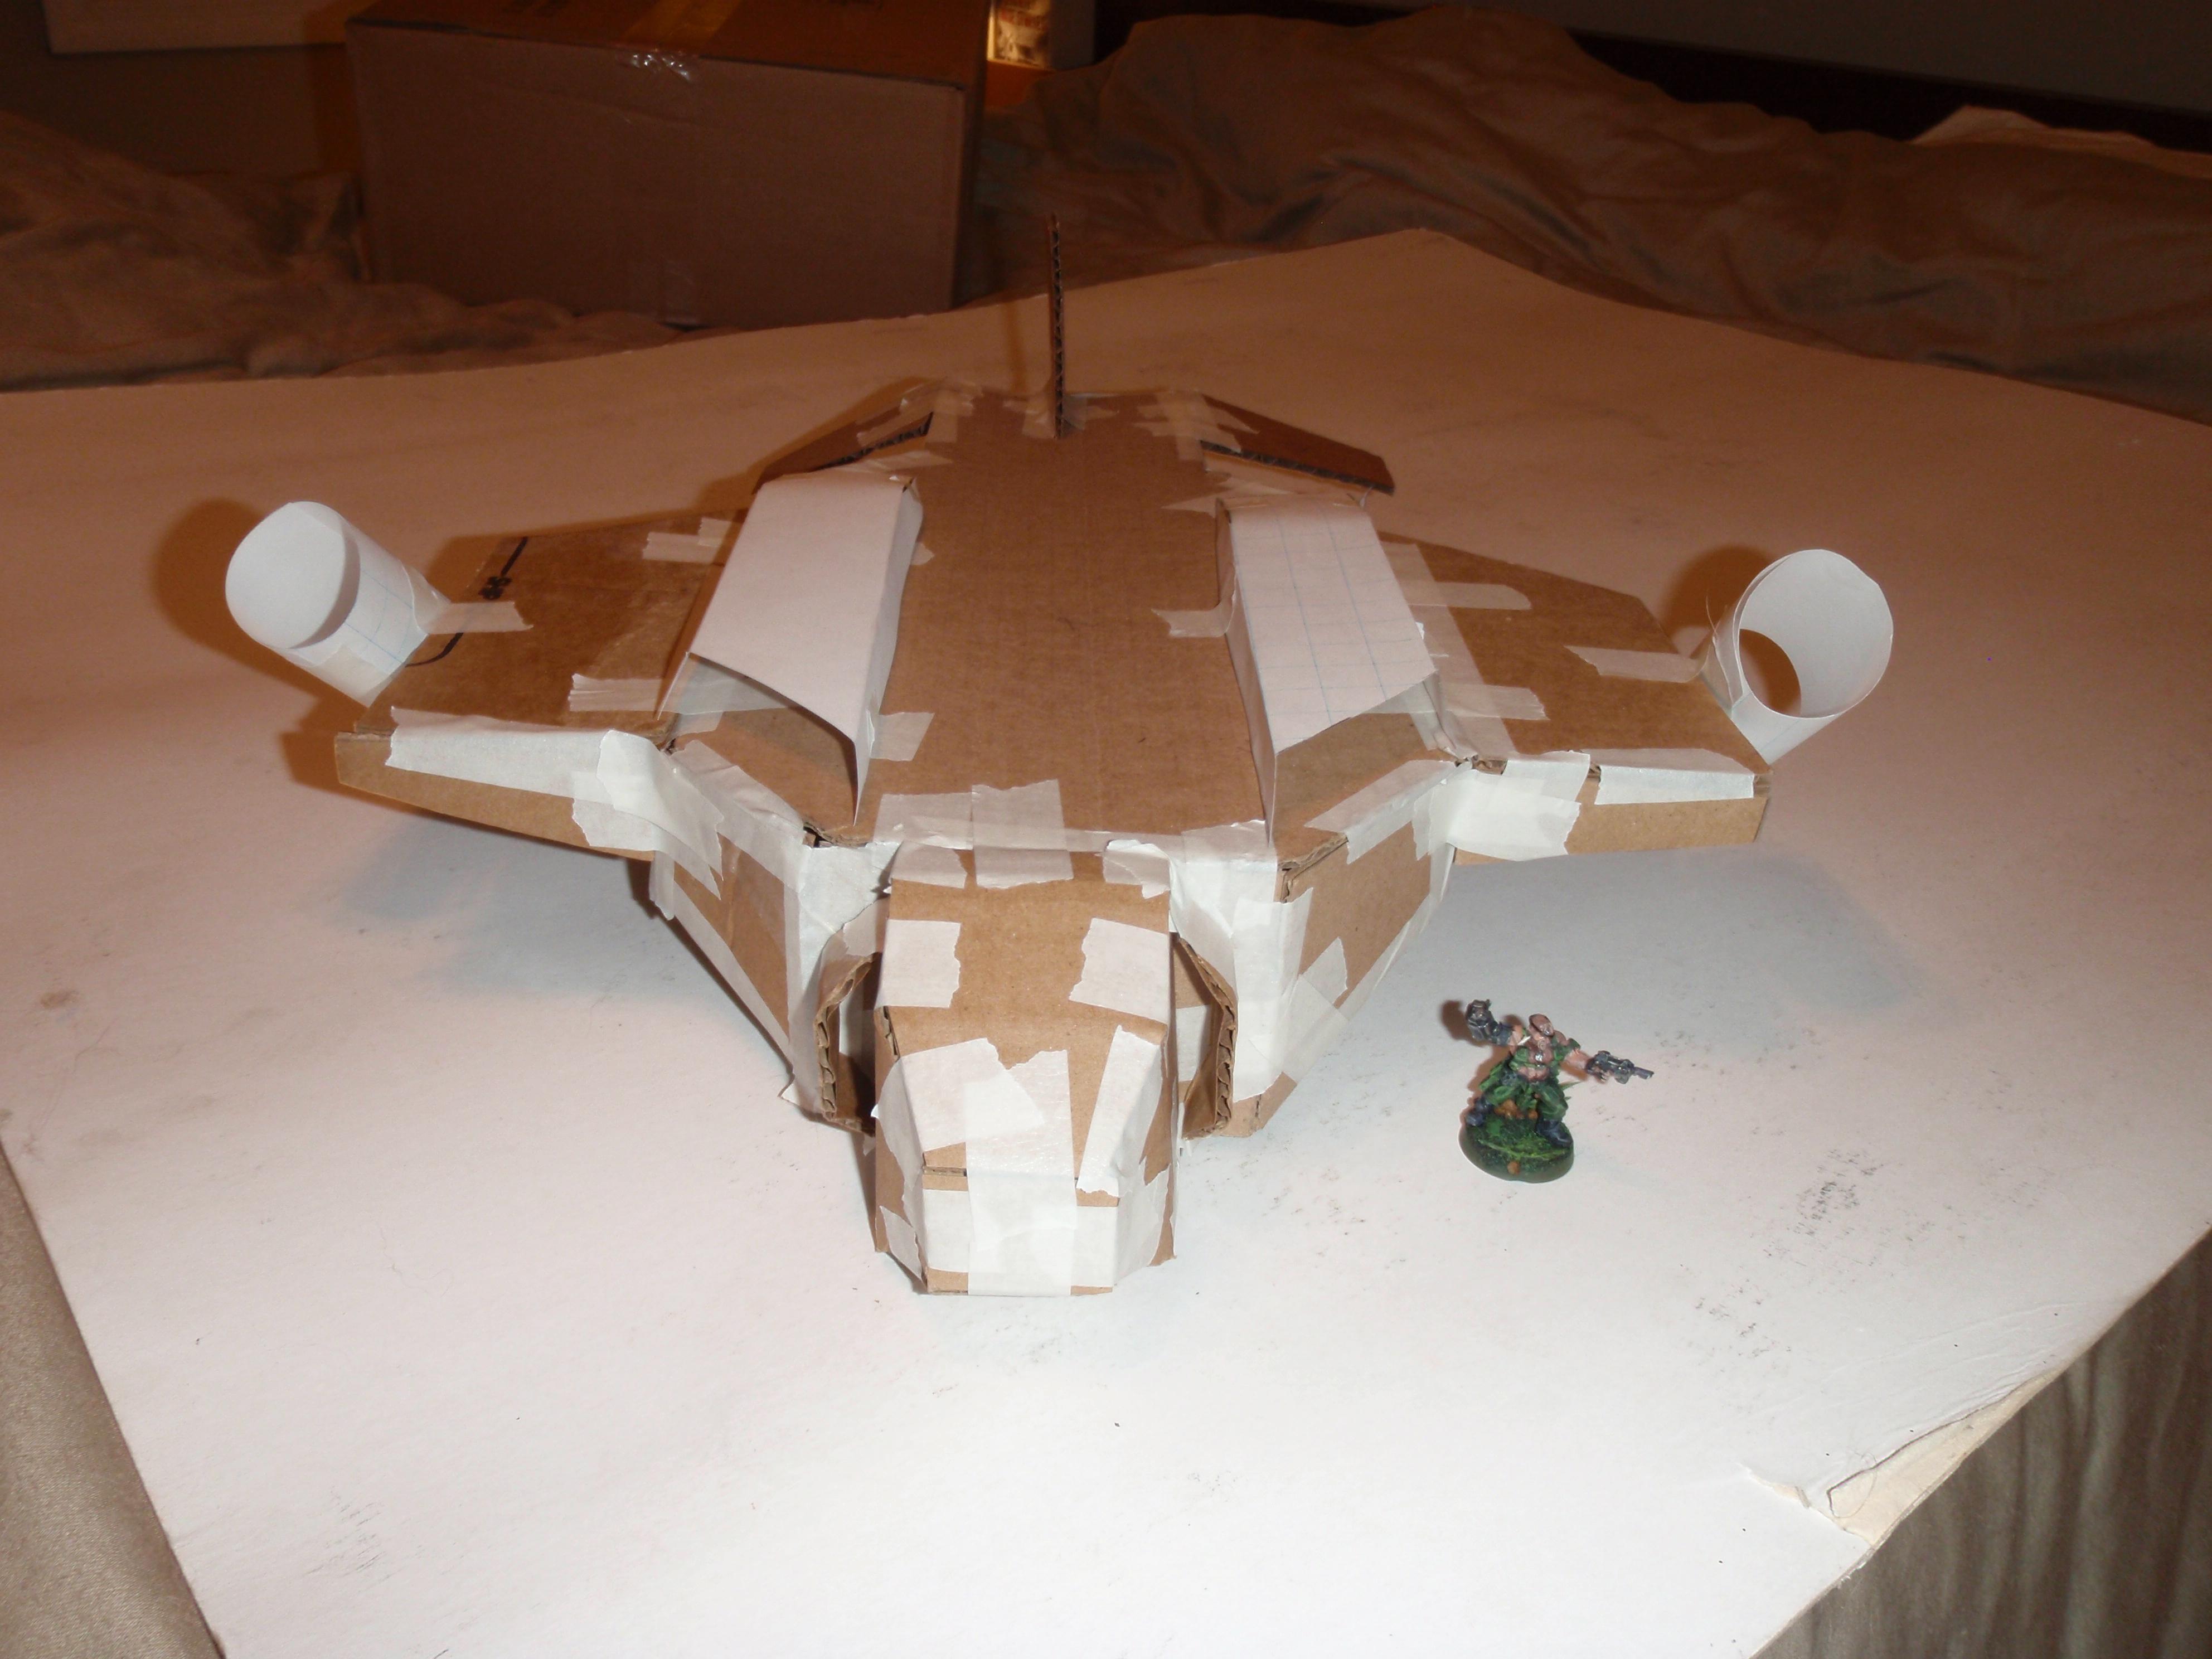 The original cardboard model I made.  The engines on the wings are not to scale